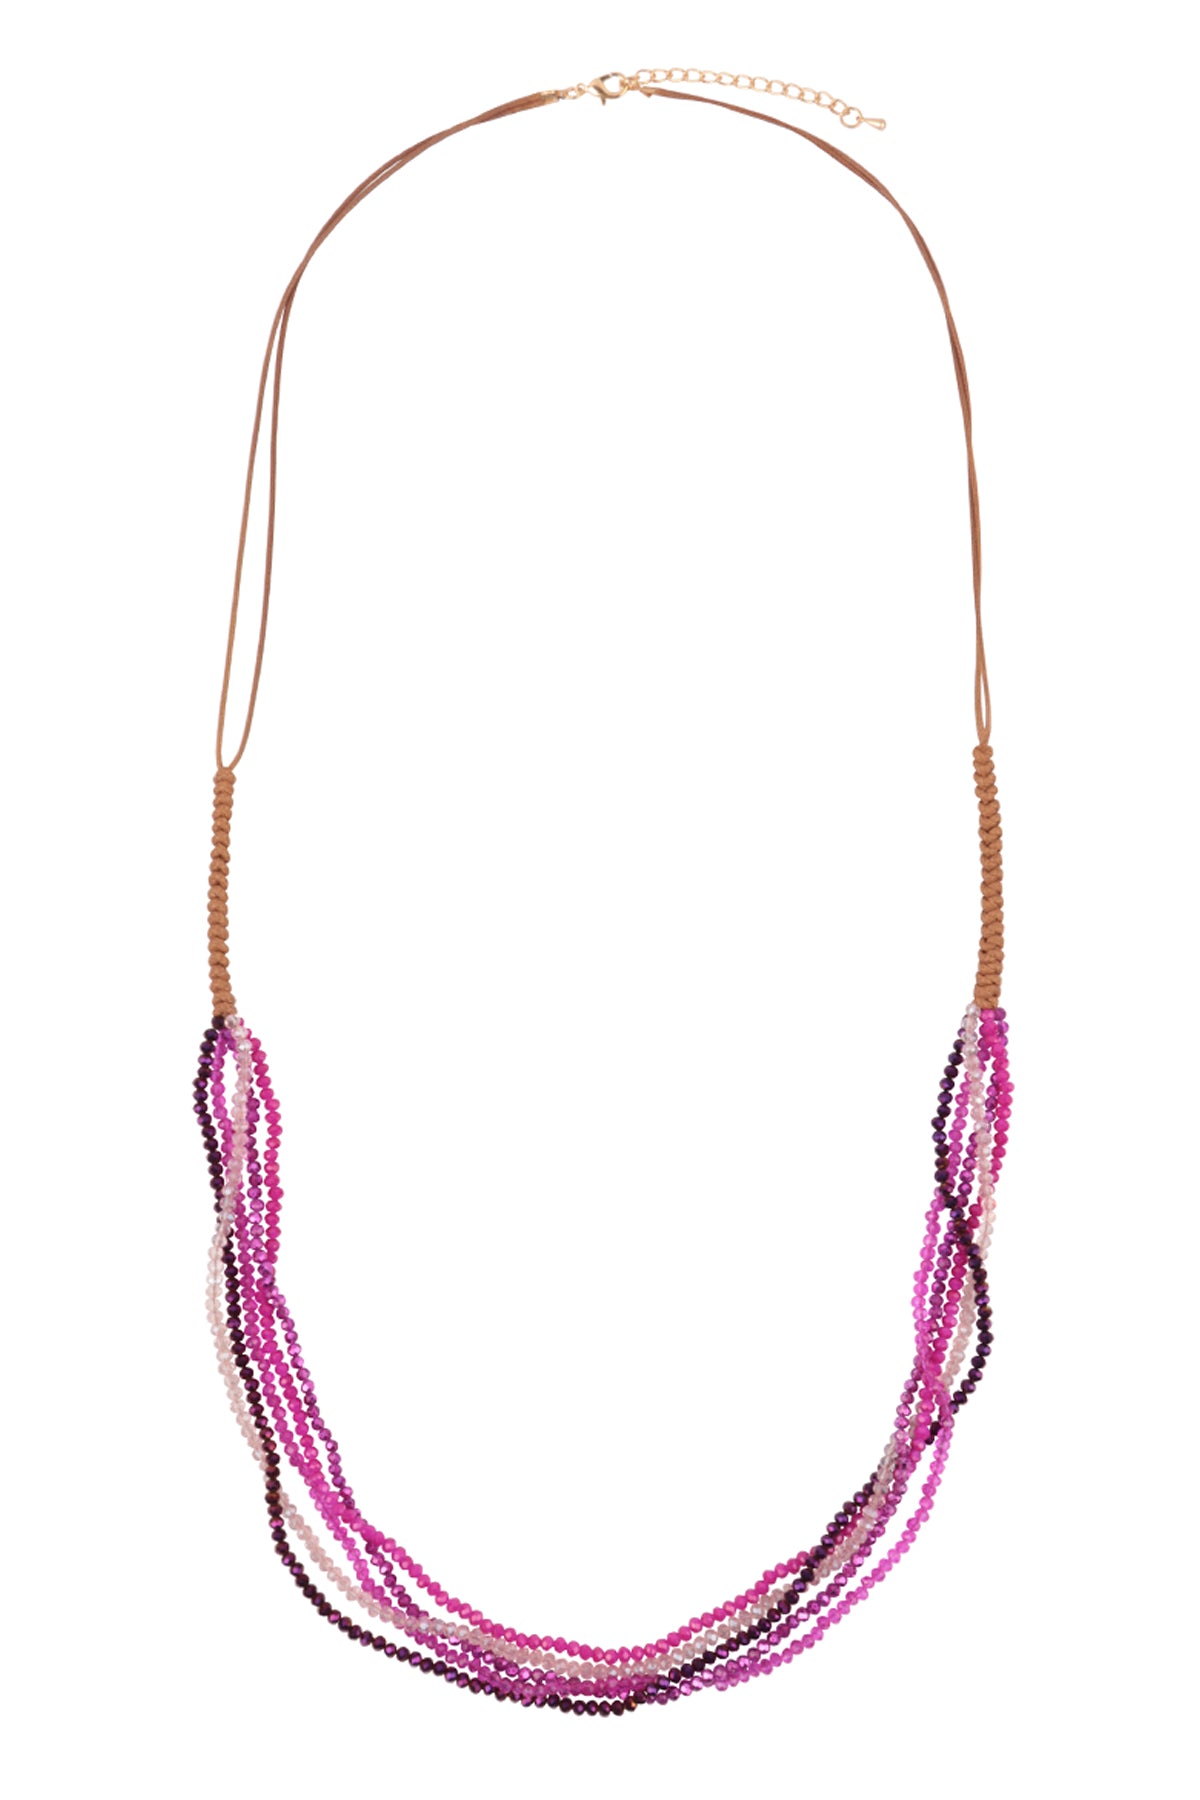 MULTI STRAND BEADS LEATHER CORD NECKLACE